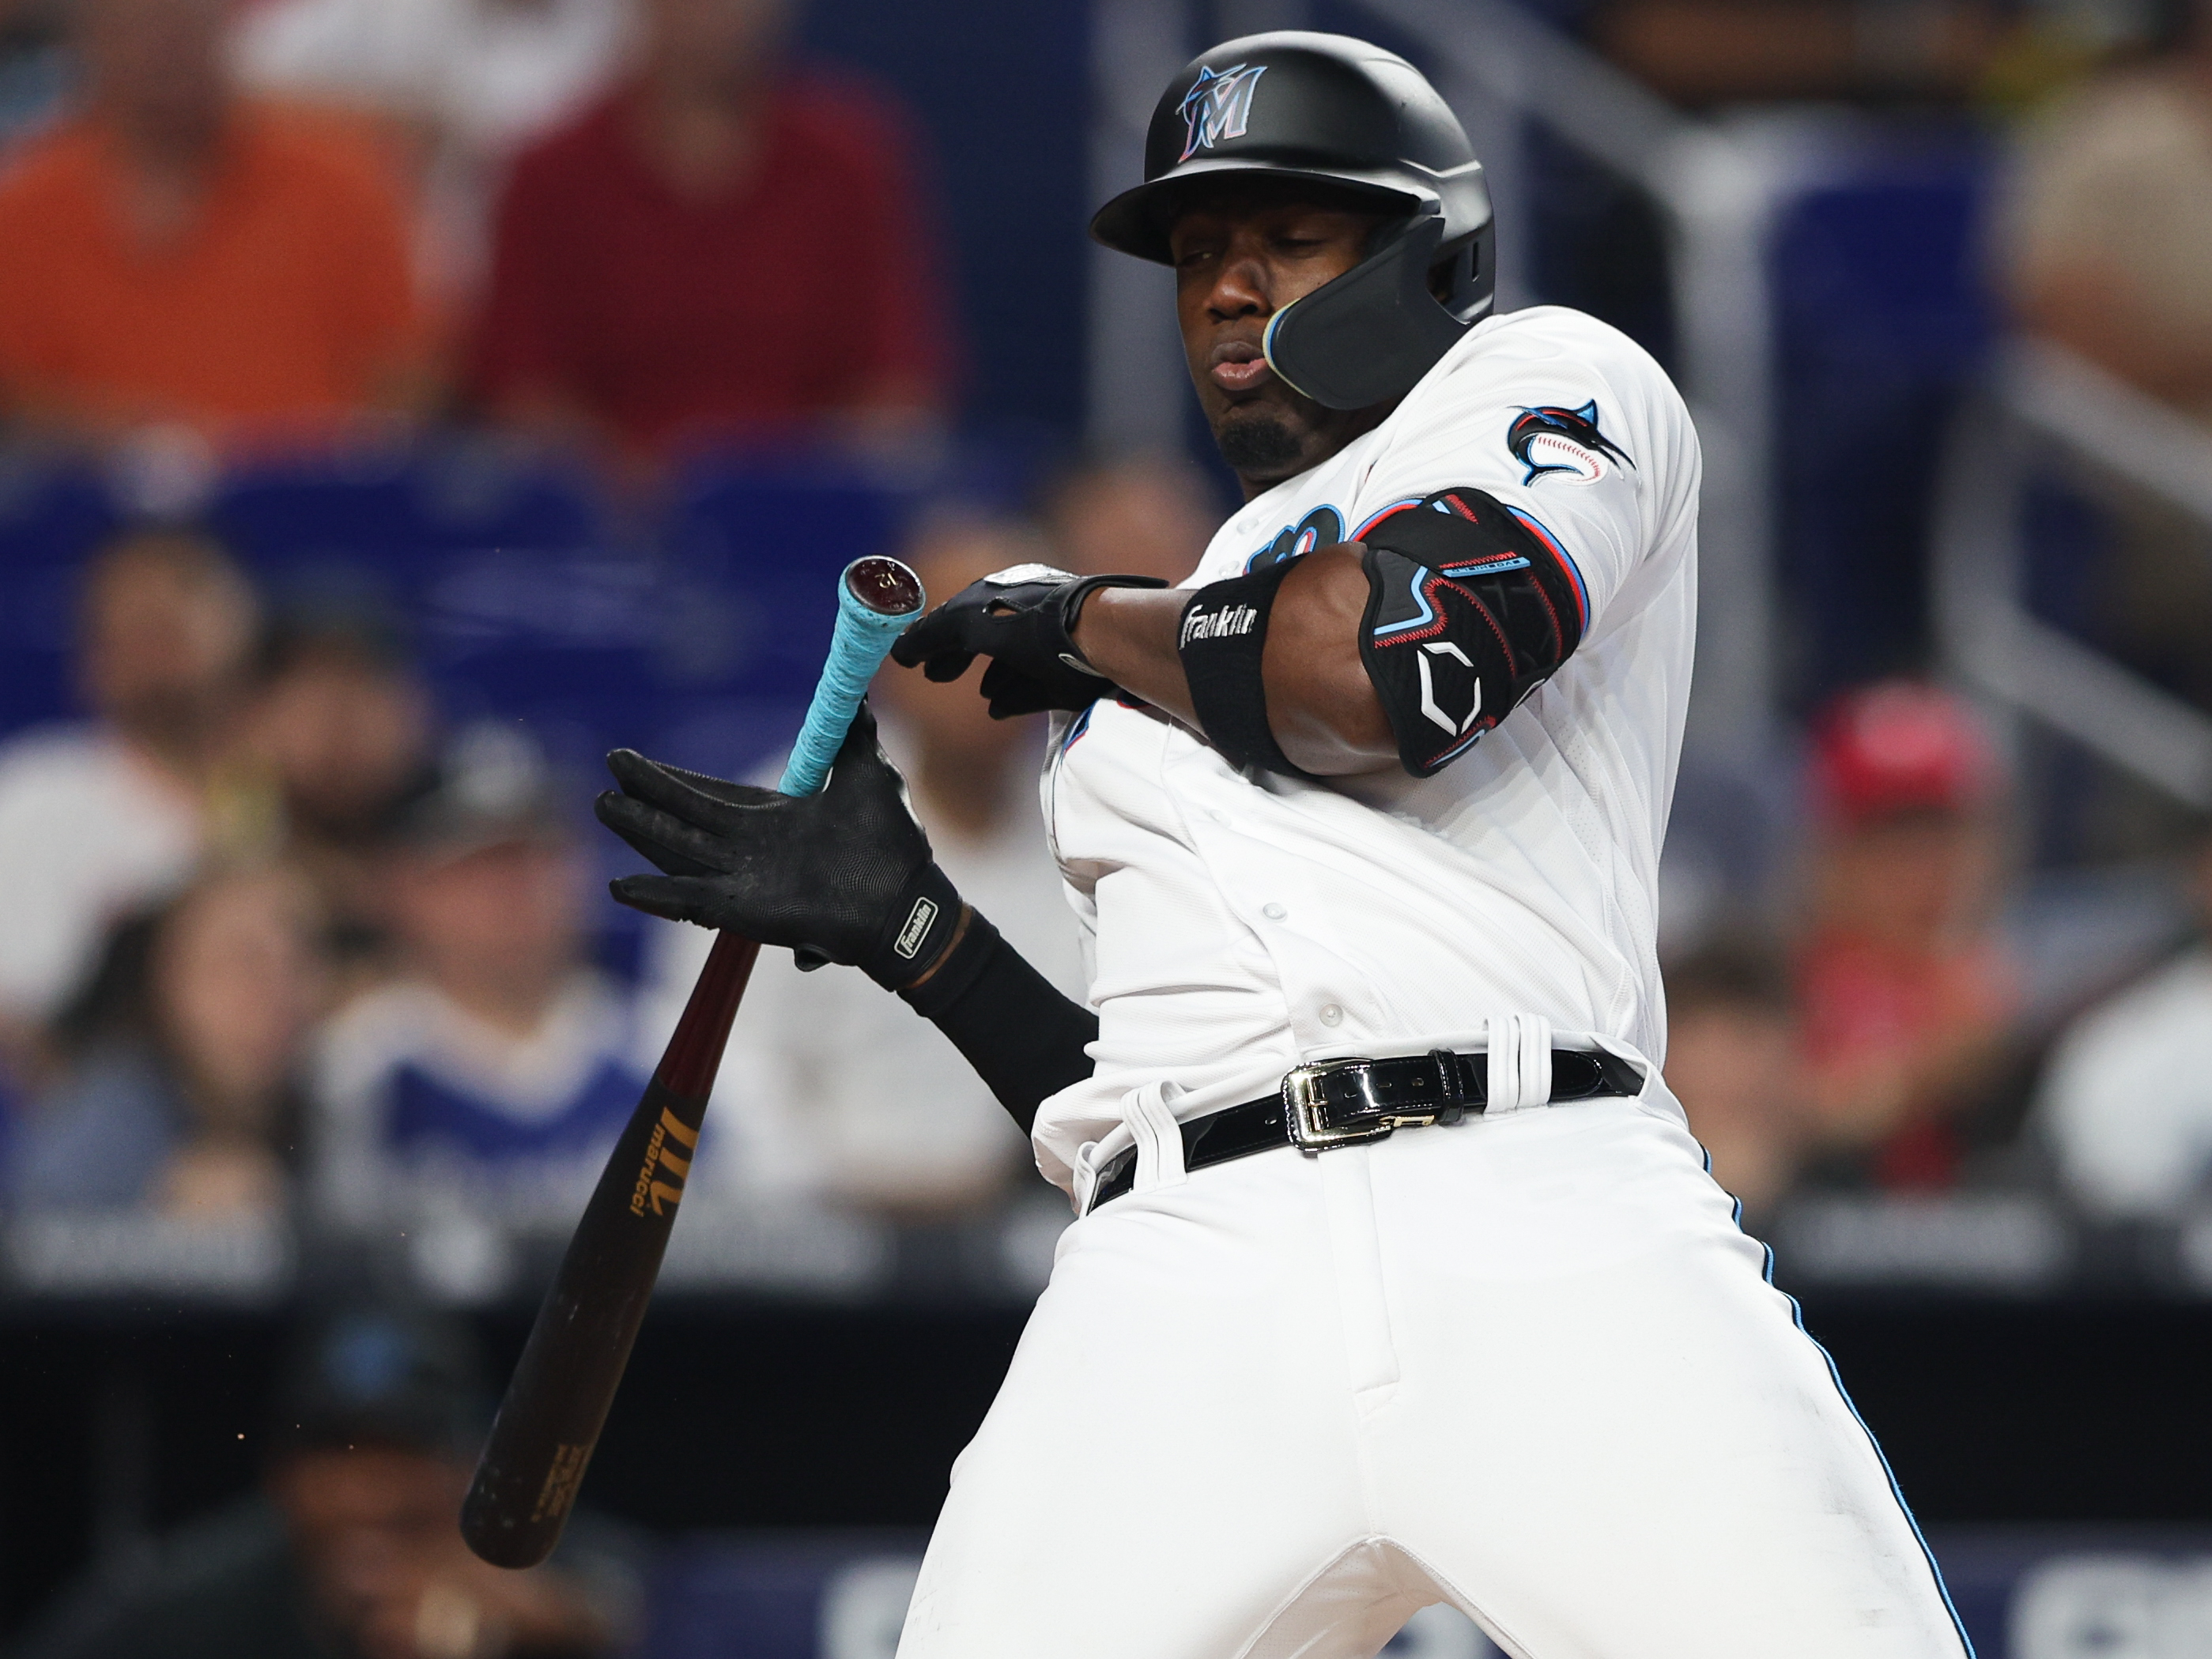 Miami Marlins right fielder Jorge Soler (12) is hit by a pitch during a game against the Philadelphia Phillies in the fourth inning at loanDepot Park.